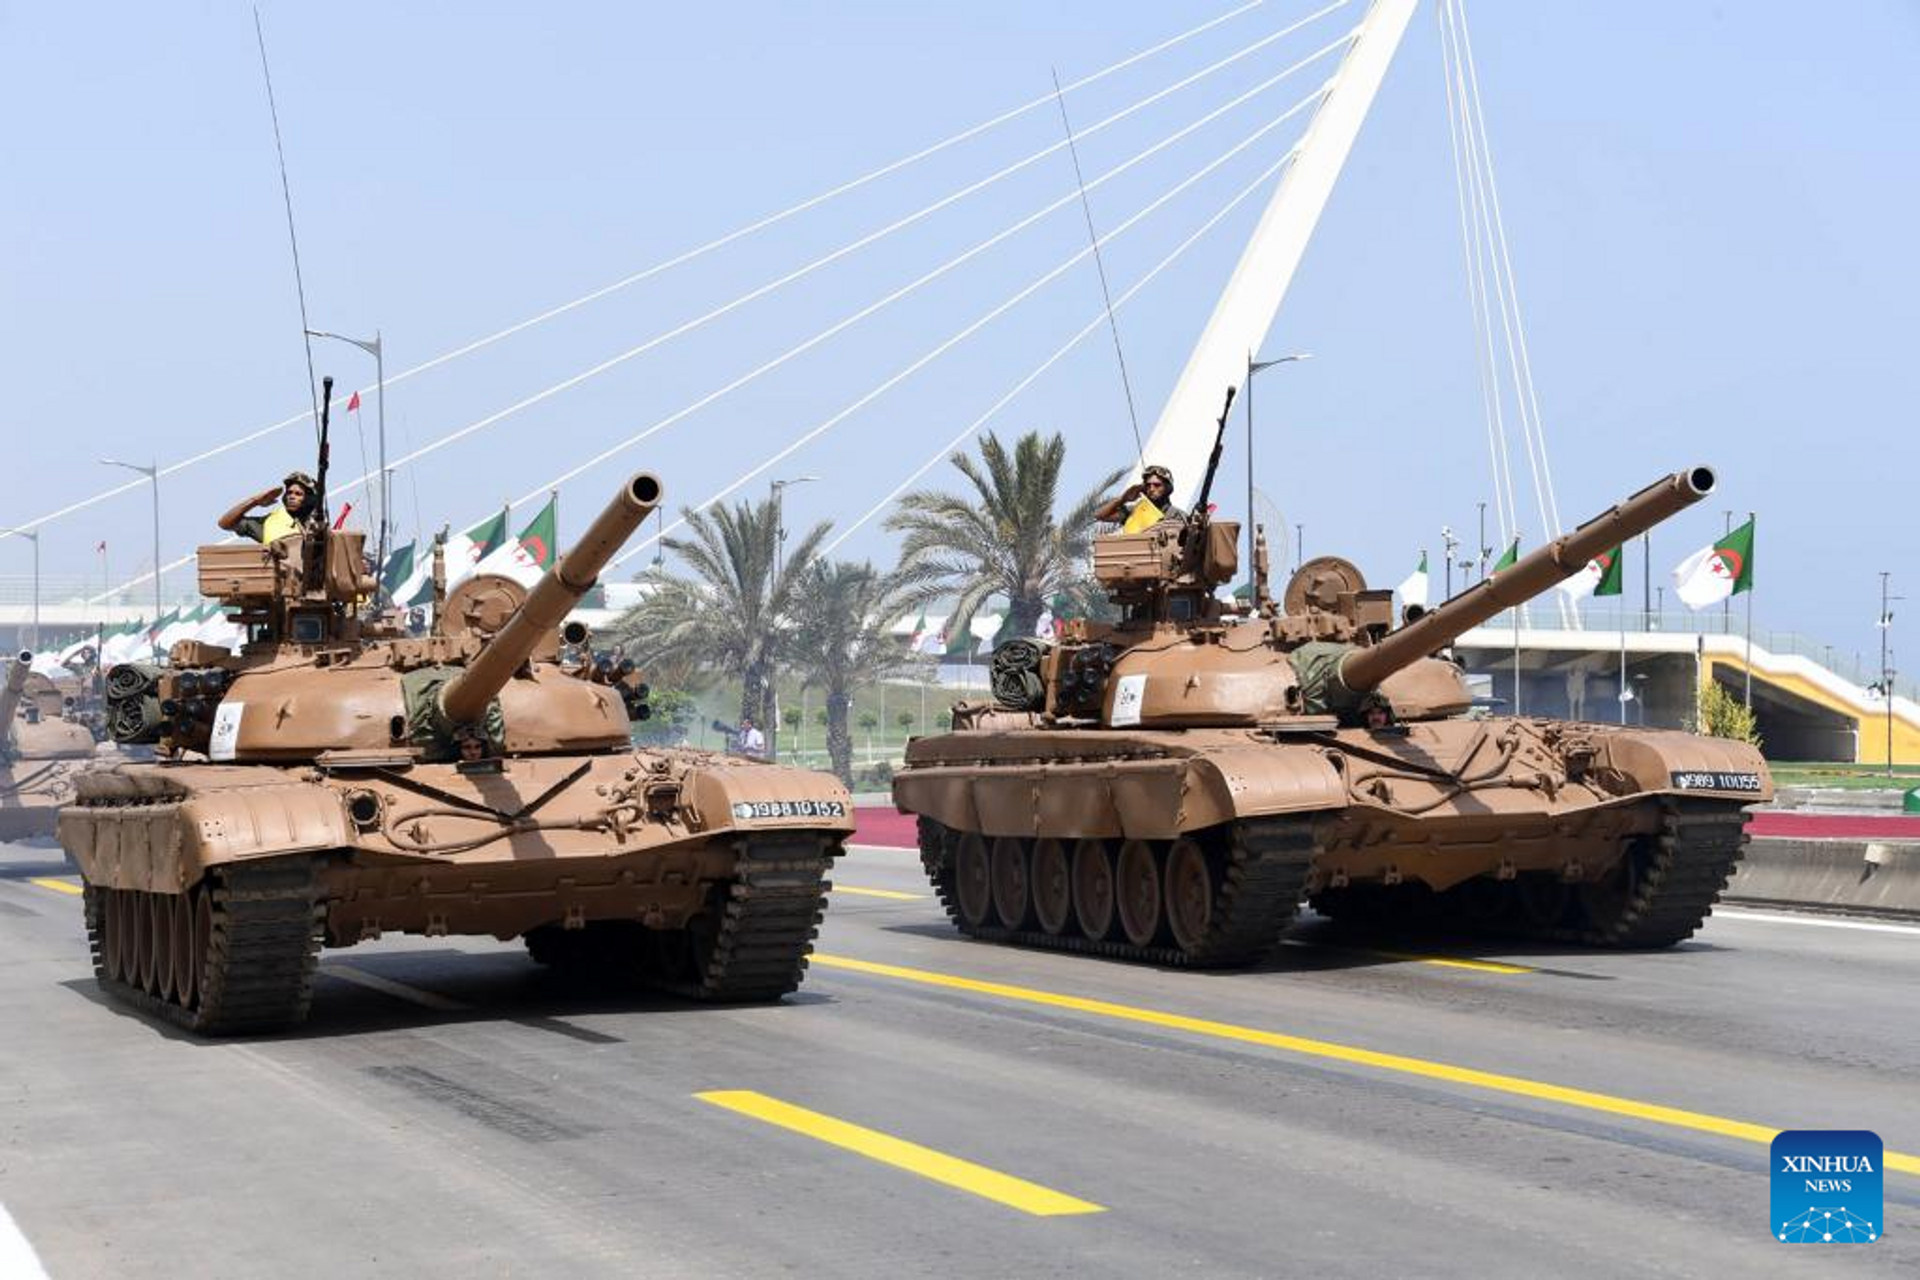 Armored vehicles are driven during a military parade to celebrate the 60th anniversary of Algeria's independence in Algiers, capital of Algeria, on July 5, 2022. Algeria on Tuesday held a grand military parade to celebrate the 60th anniversary of its independence from French colonialism, with the attendance of senior local and foreign officials. - Sputnik International, 1920, 10.10.2022